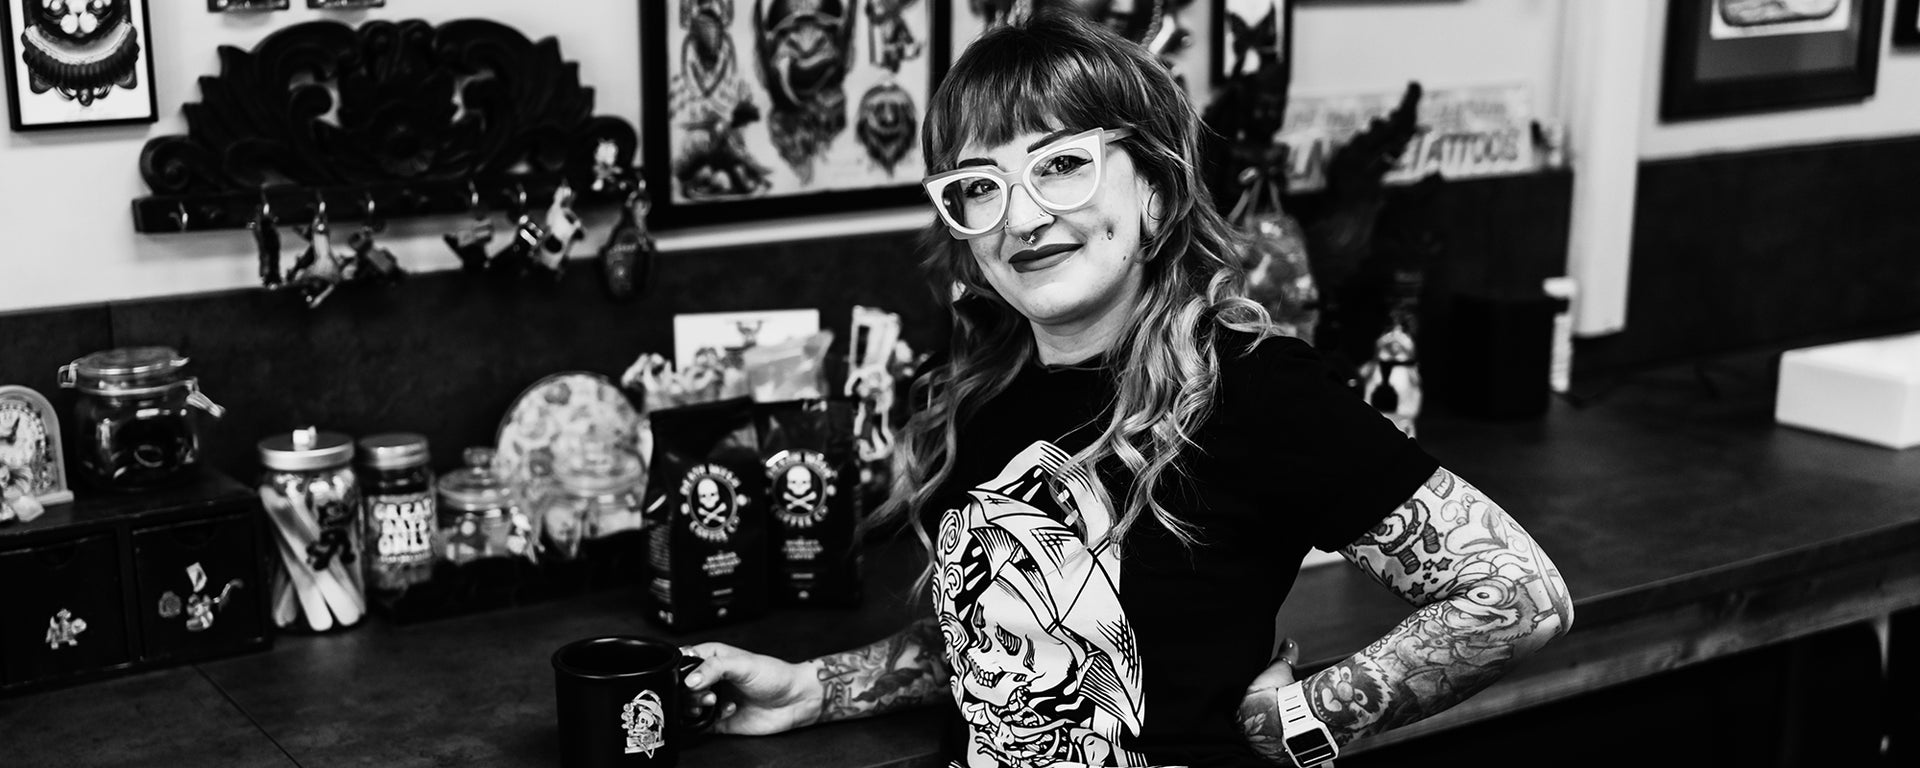 13 Genius Gifts For Tattoo Artists » All Gifts Considered  Tattoo artists, Tattoo  artist quotes, Tattoo artists near me